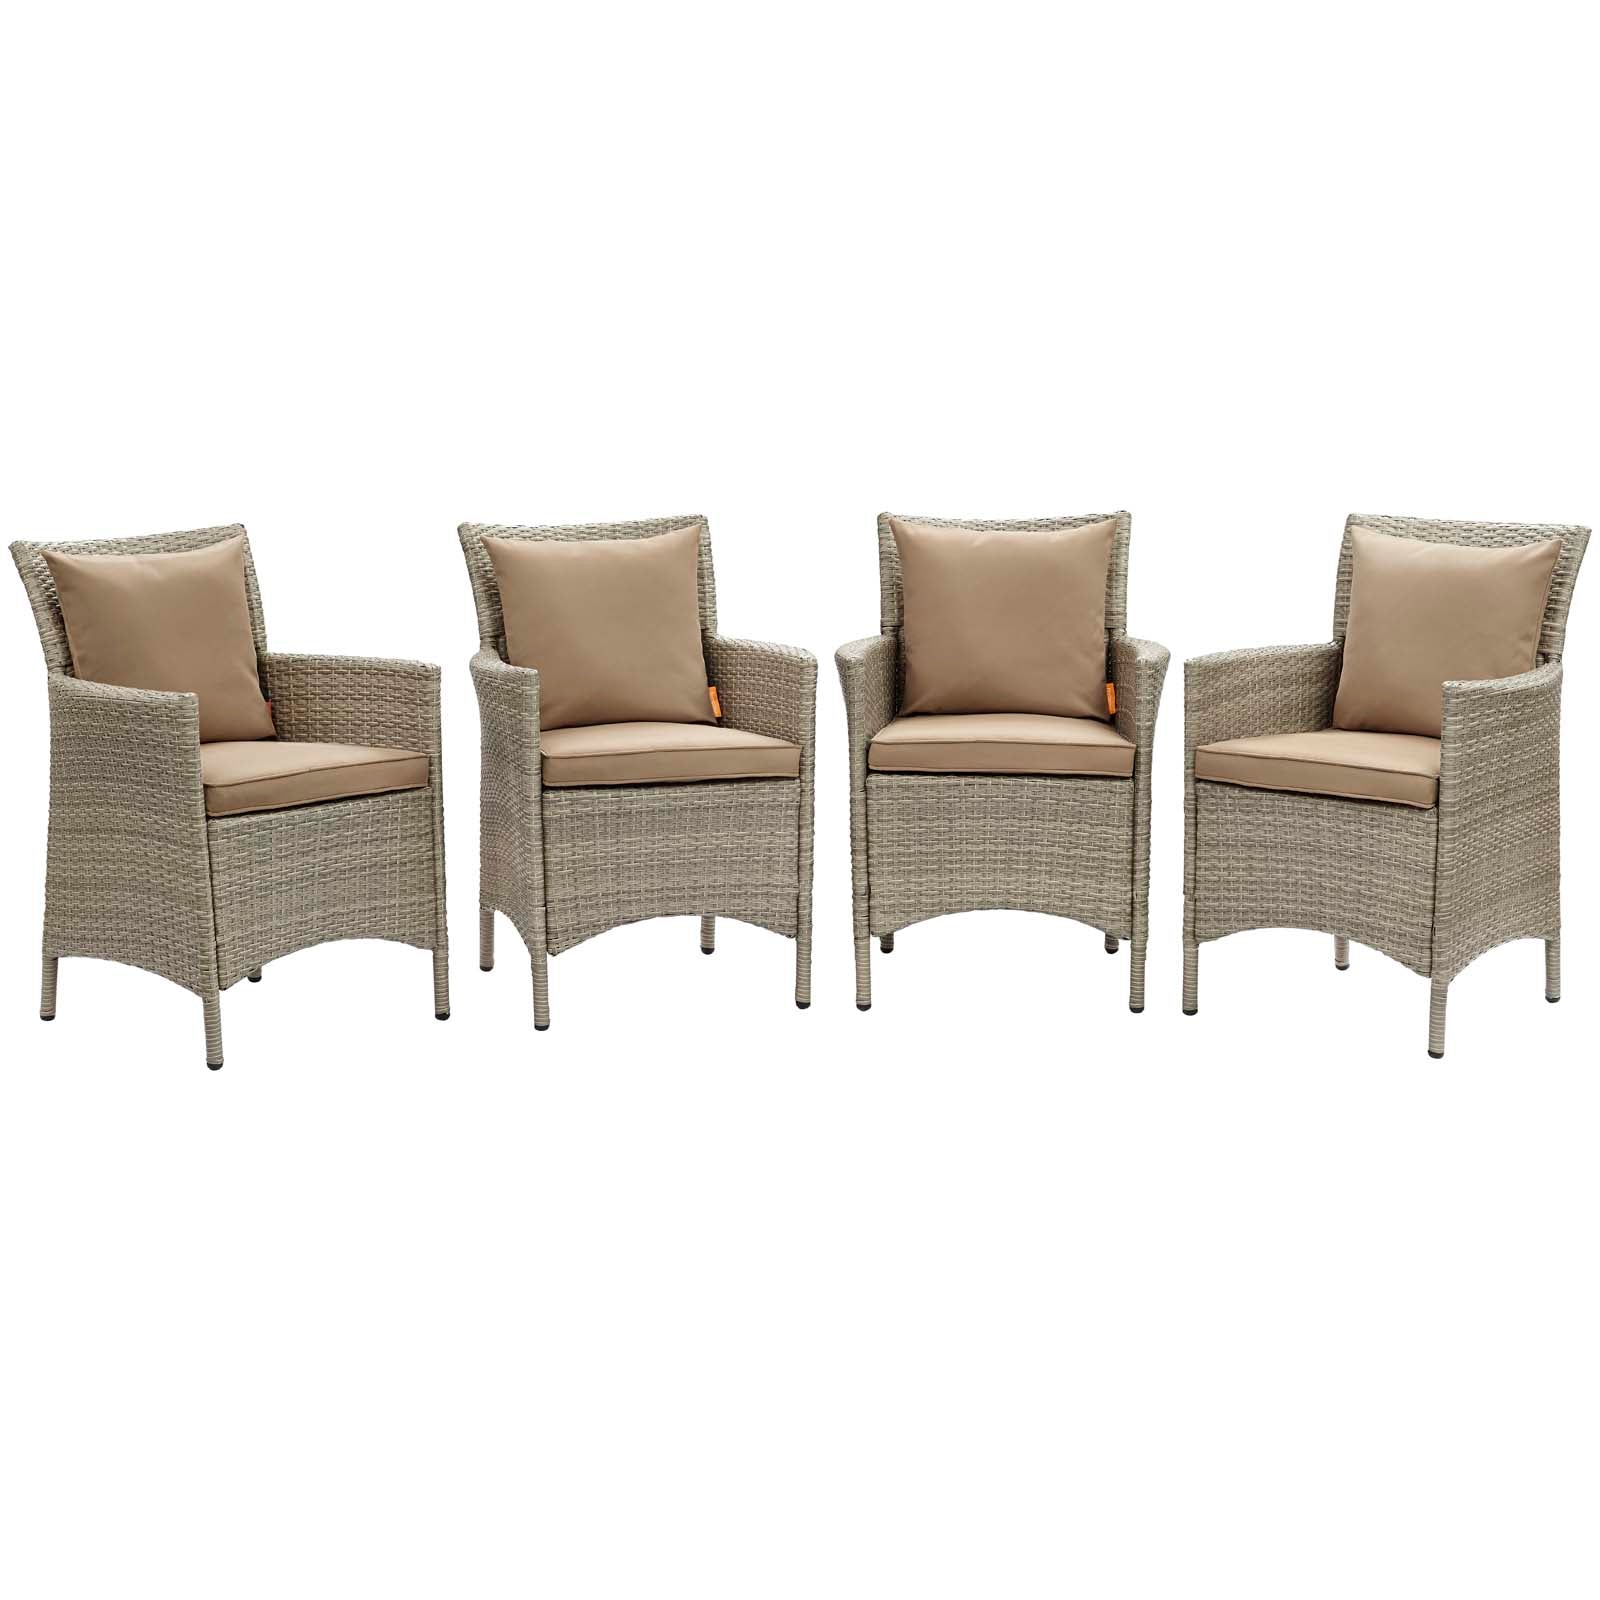 Modway Outdoor Dining Chairs - Conduit Outdoor Patio Wicker Rattan Dining Armchair Set of 4 Light Gray Mocha